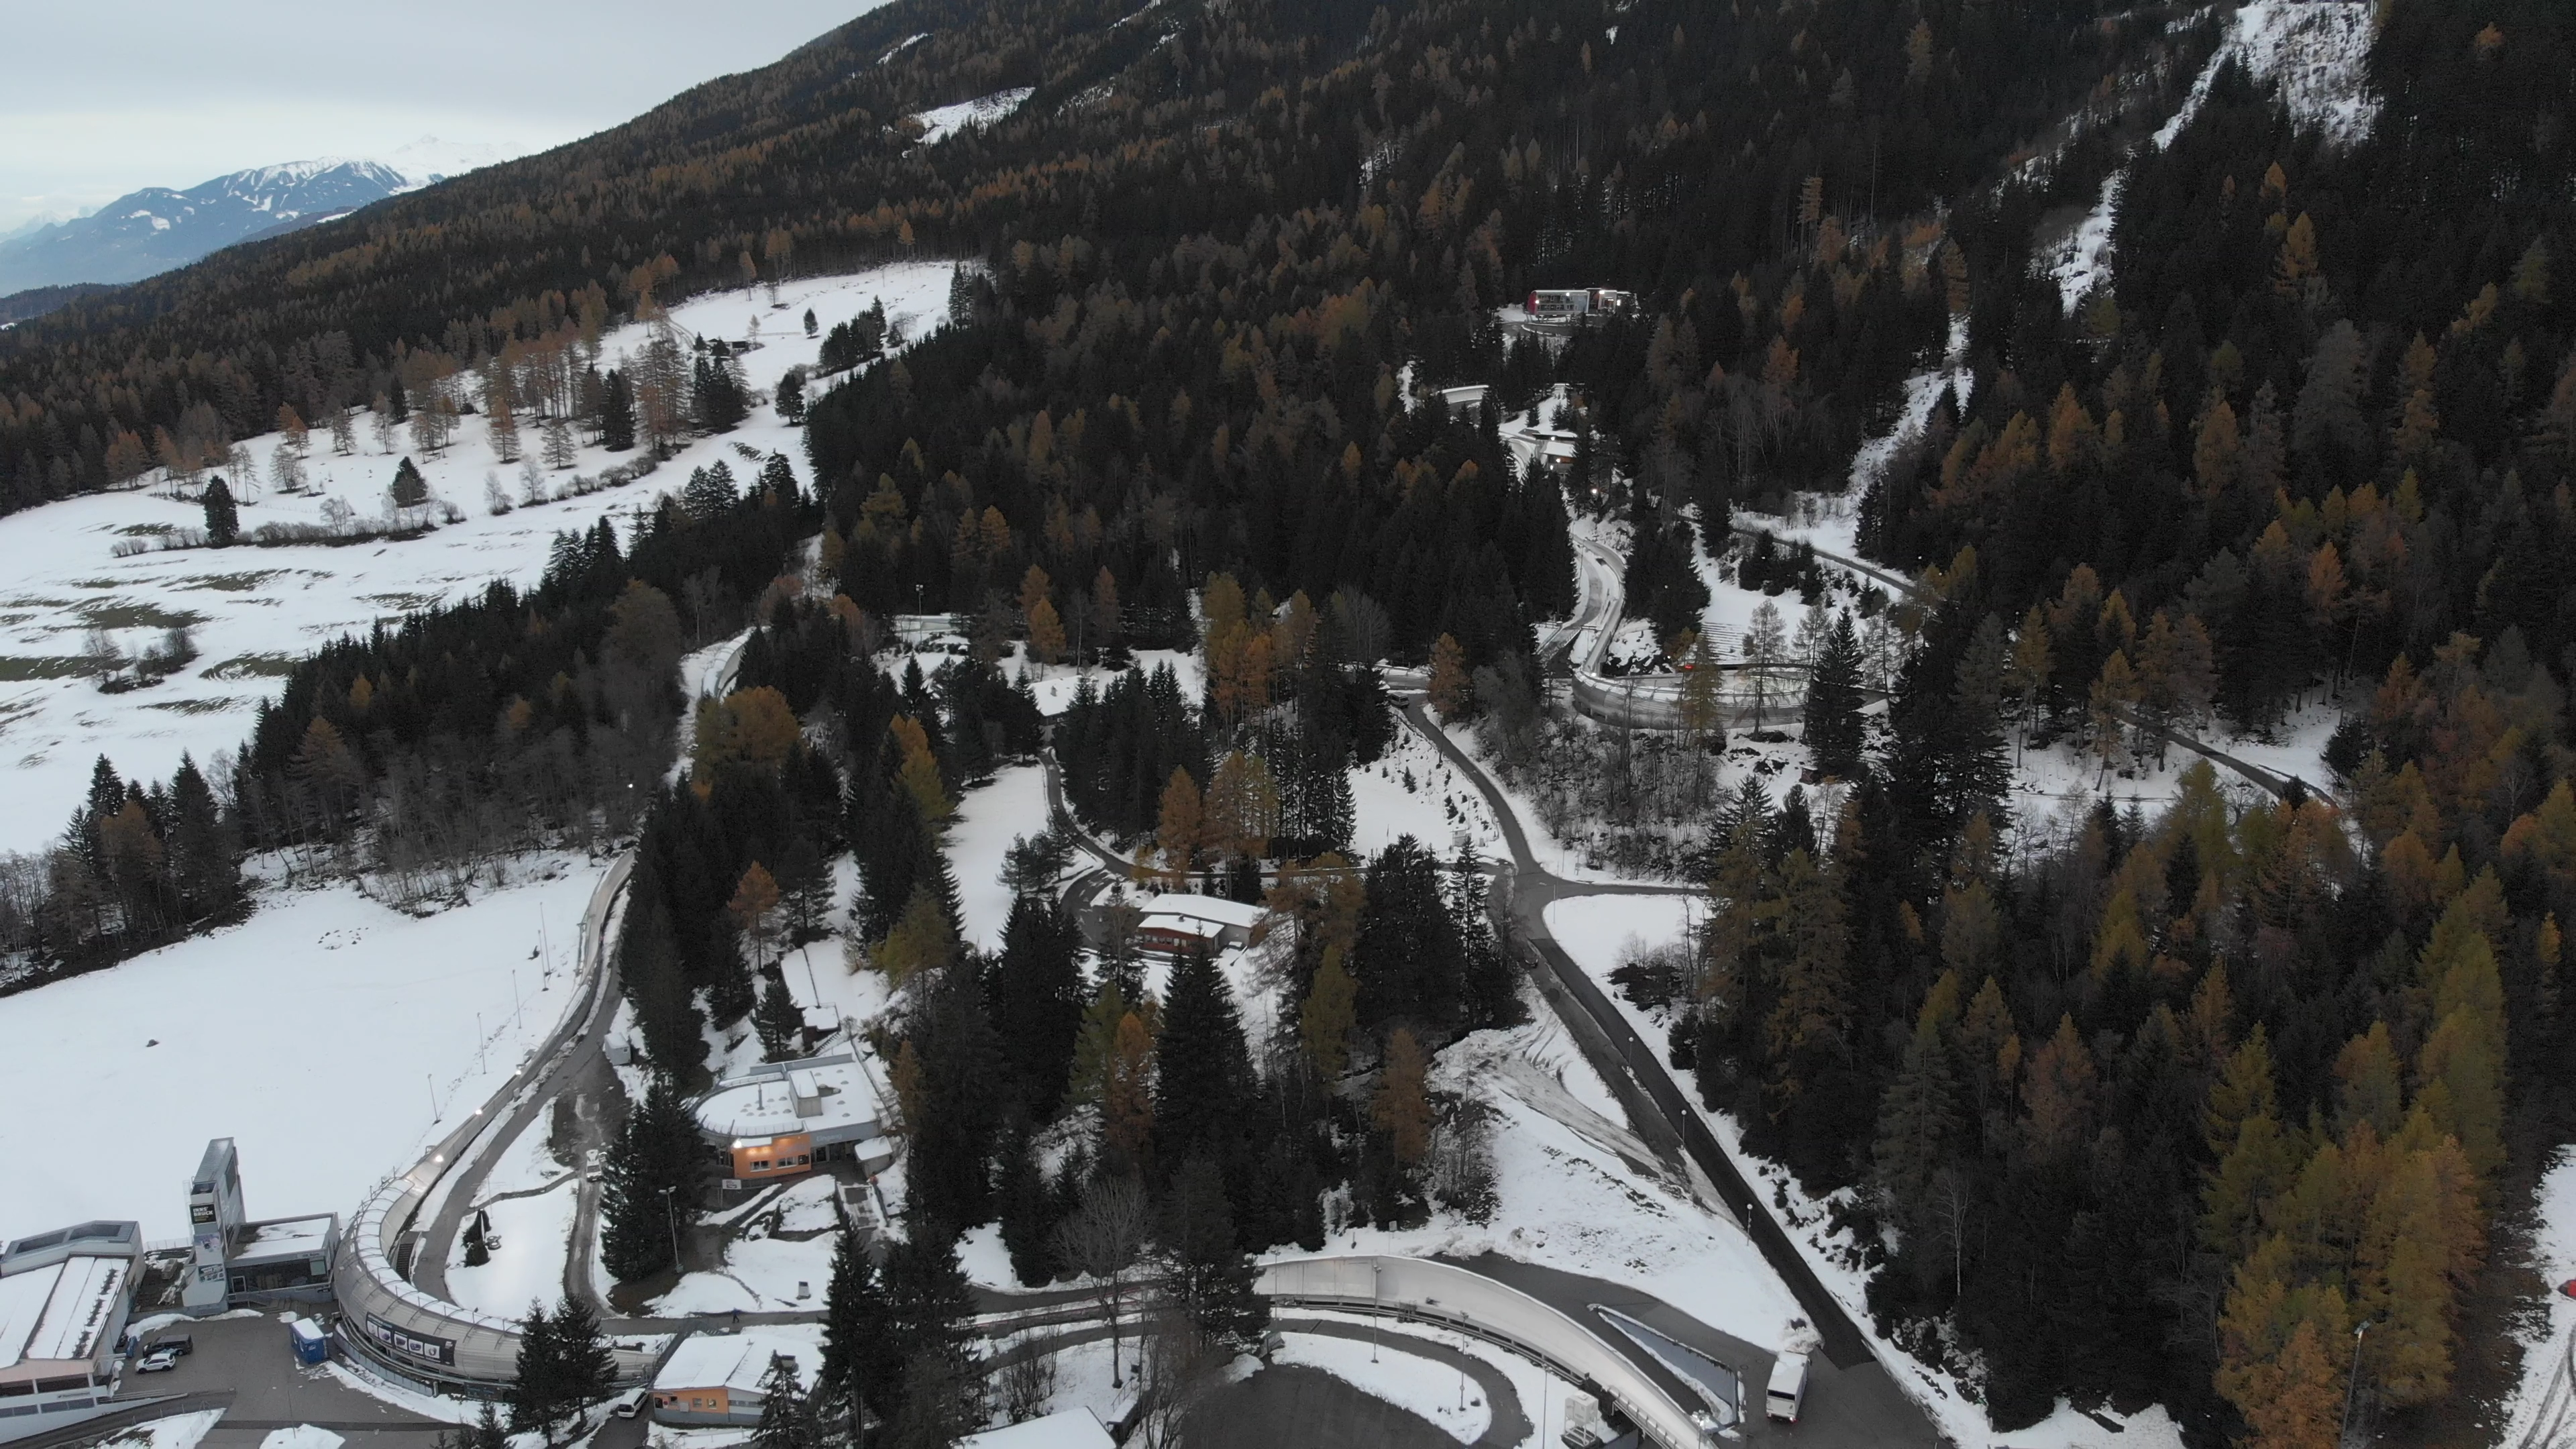  Bobsleigh and Luge track, Igls, epic